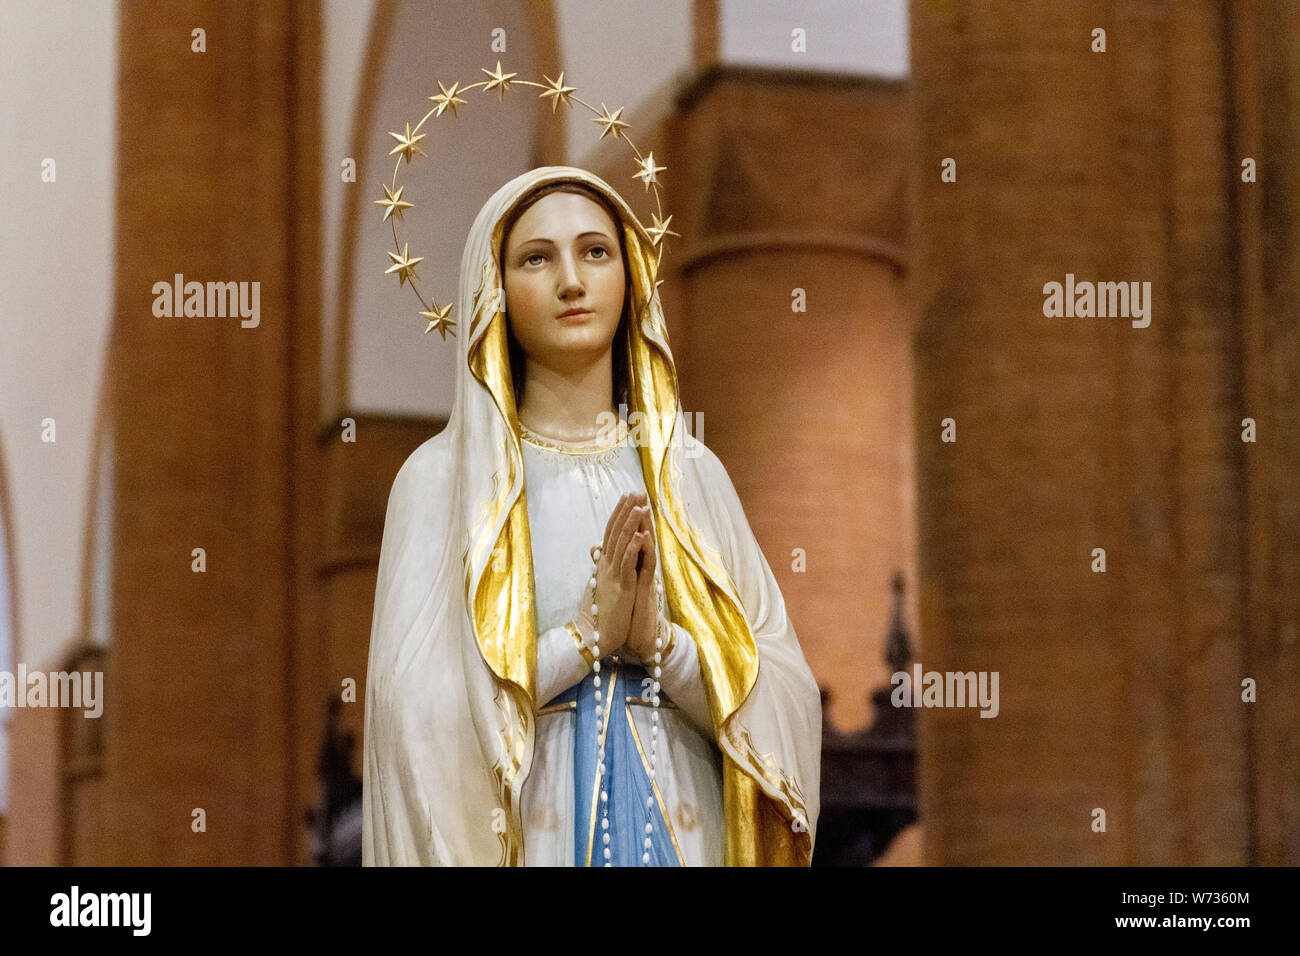 The statue of Our Lady of Lourdes in the "Santa Maria del Carmine" church  (Holy Mary of Carmel) in Pavia Stock Photo - Alamy